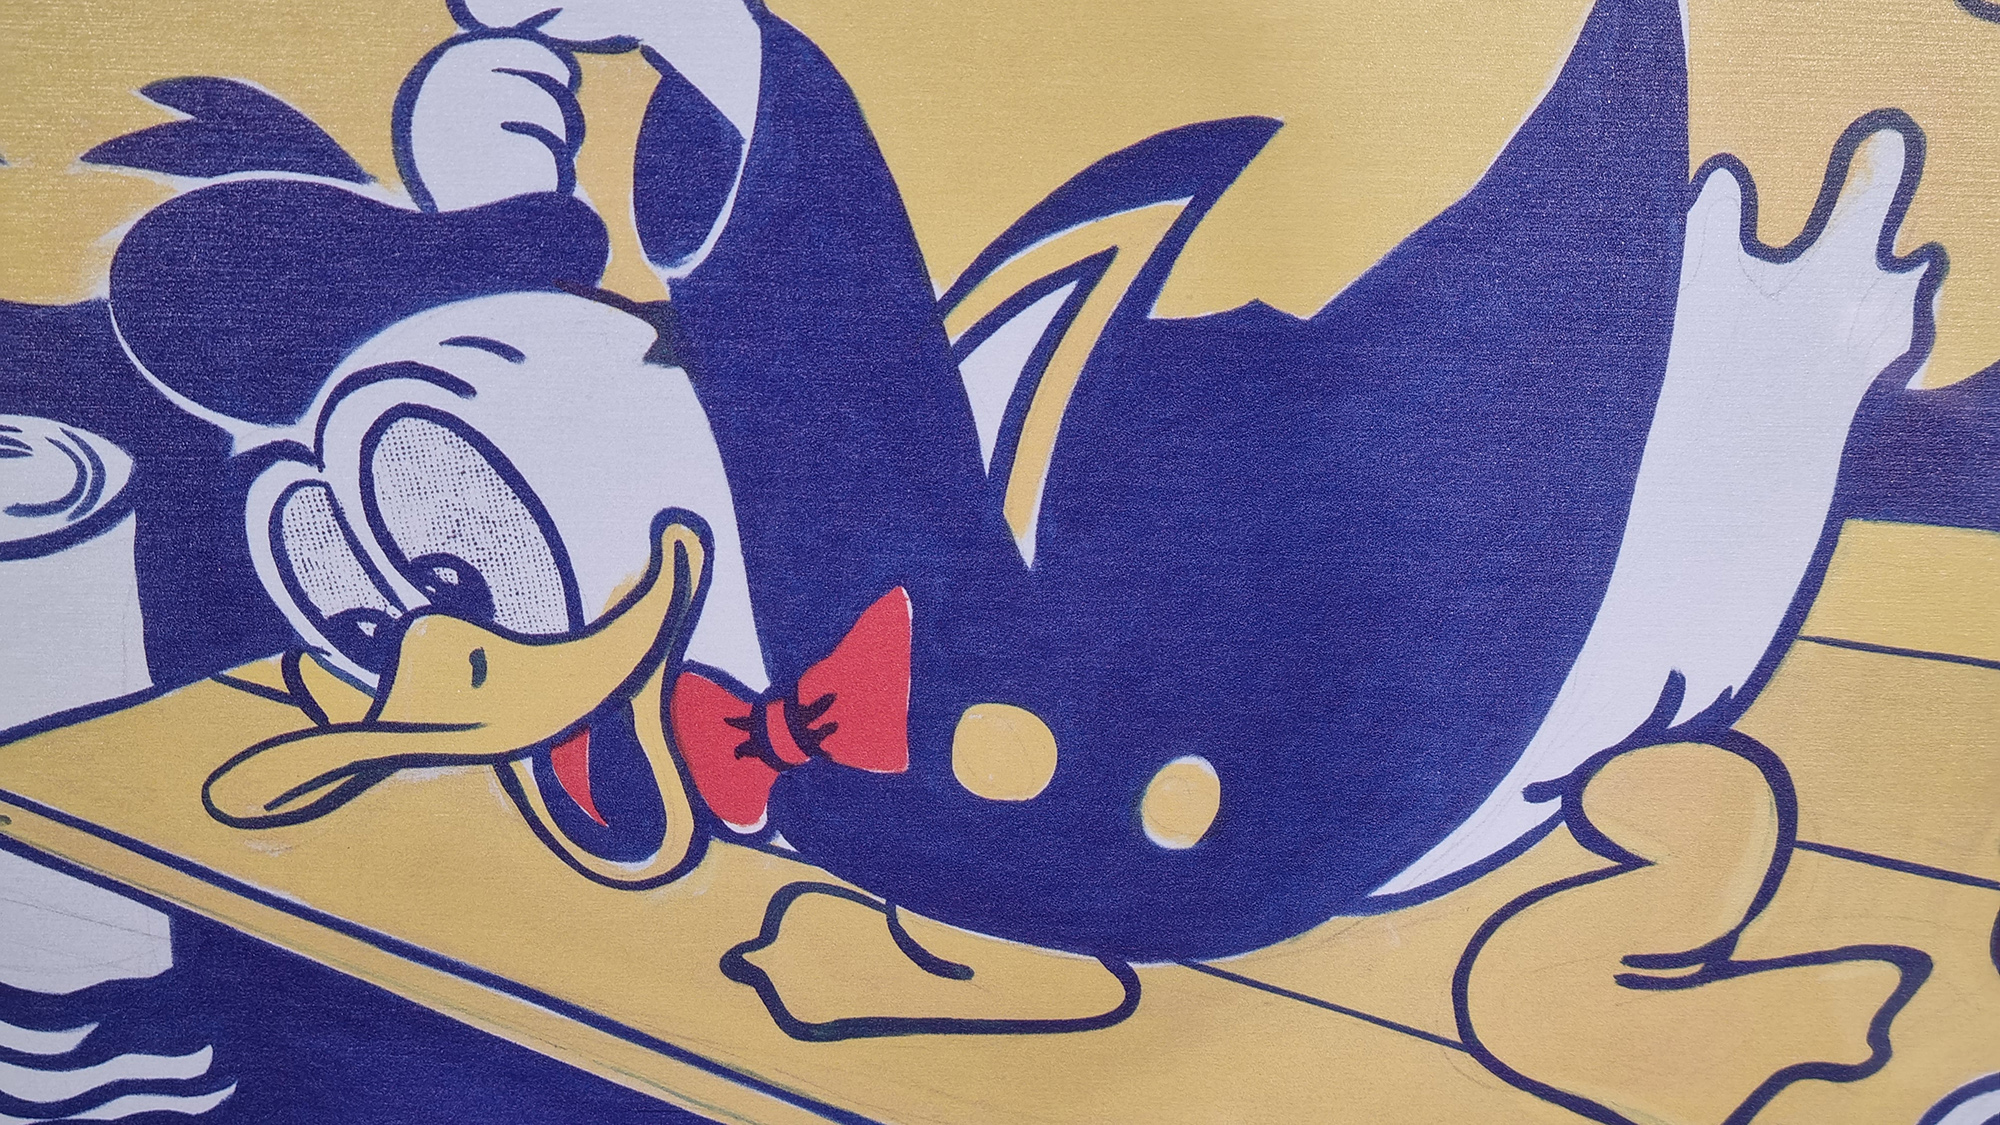 Rare Roy Lichtenstein "Look Mickey, 1961" Limited Edition on Metal. - Image 3 of 9